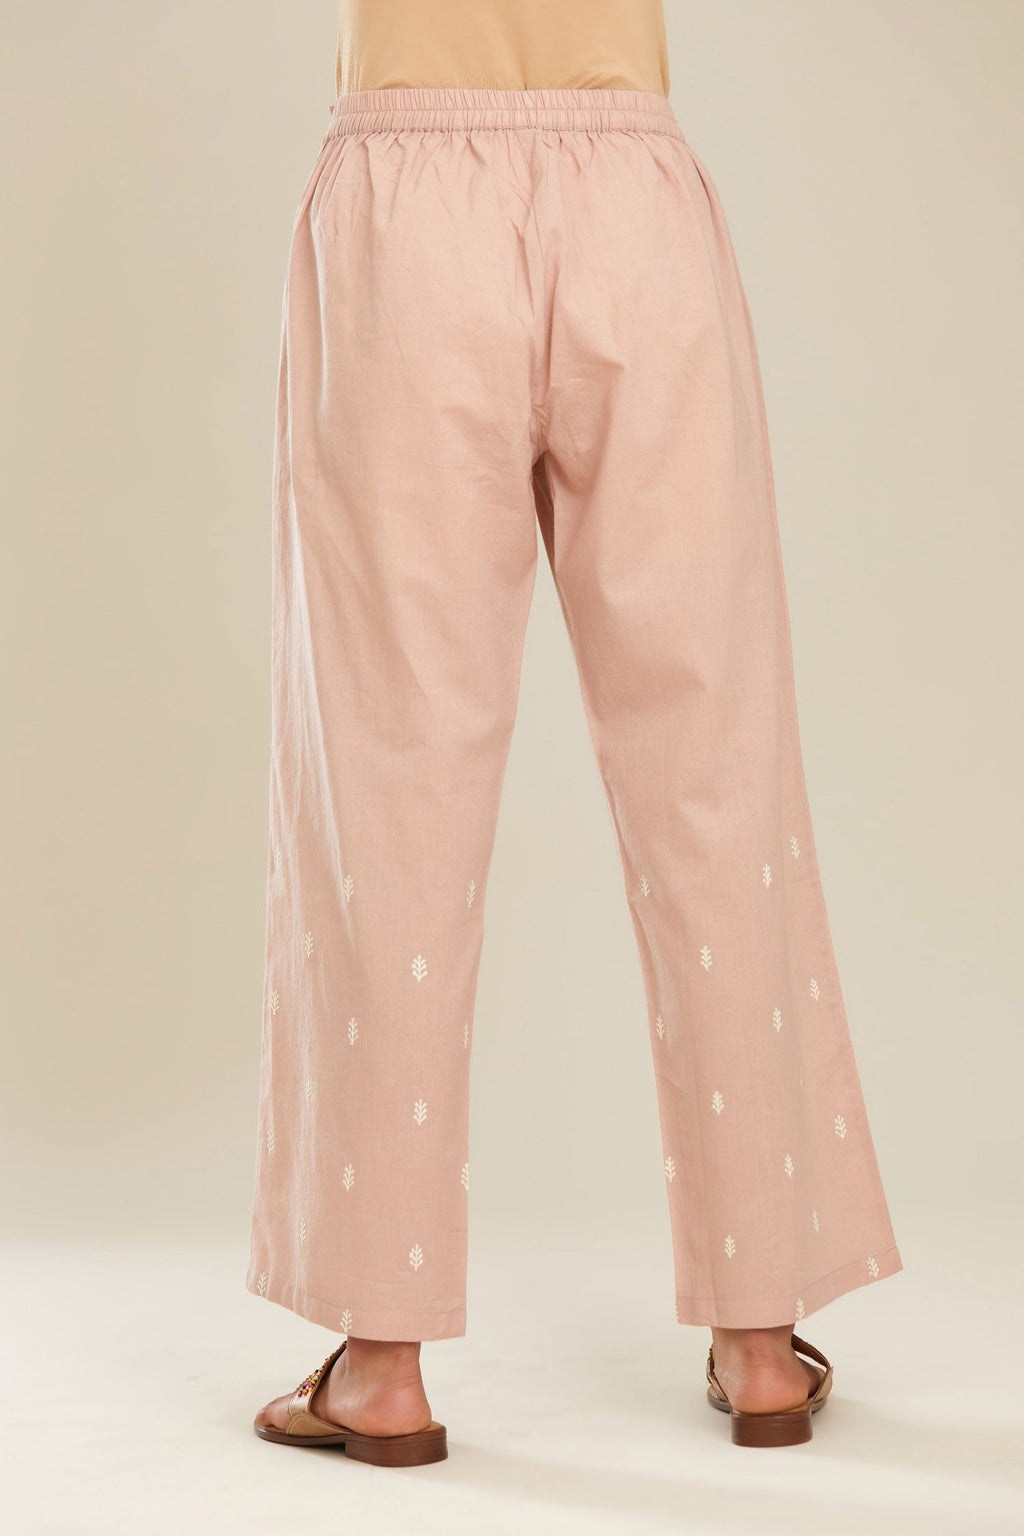 Old rose cotton straight pants with small booti embroidery.